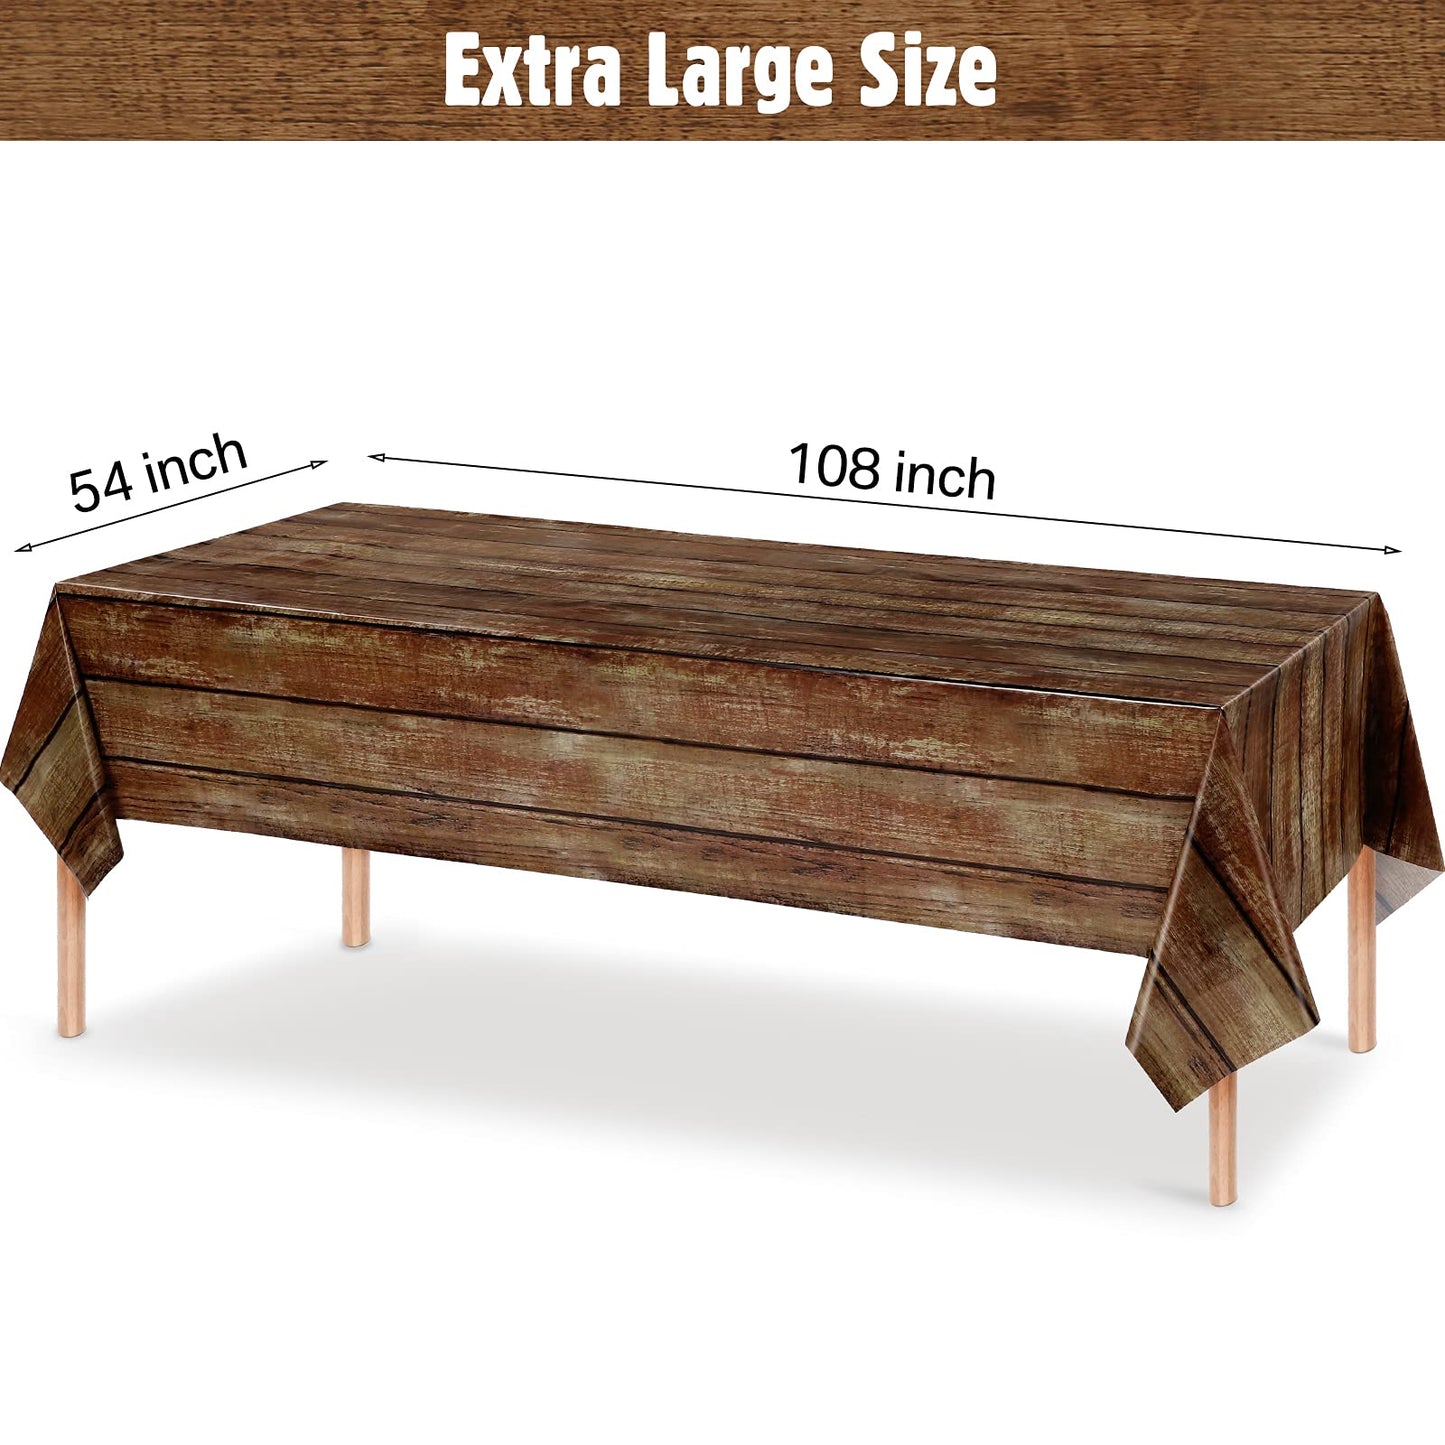 54x108 inch large size table cover